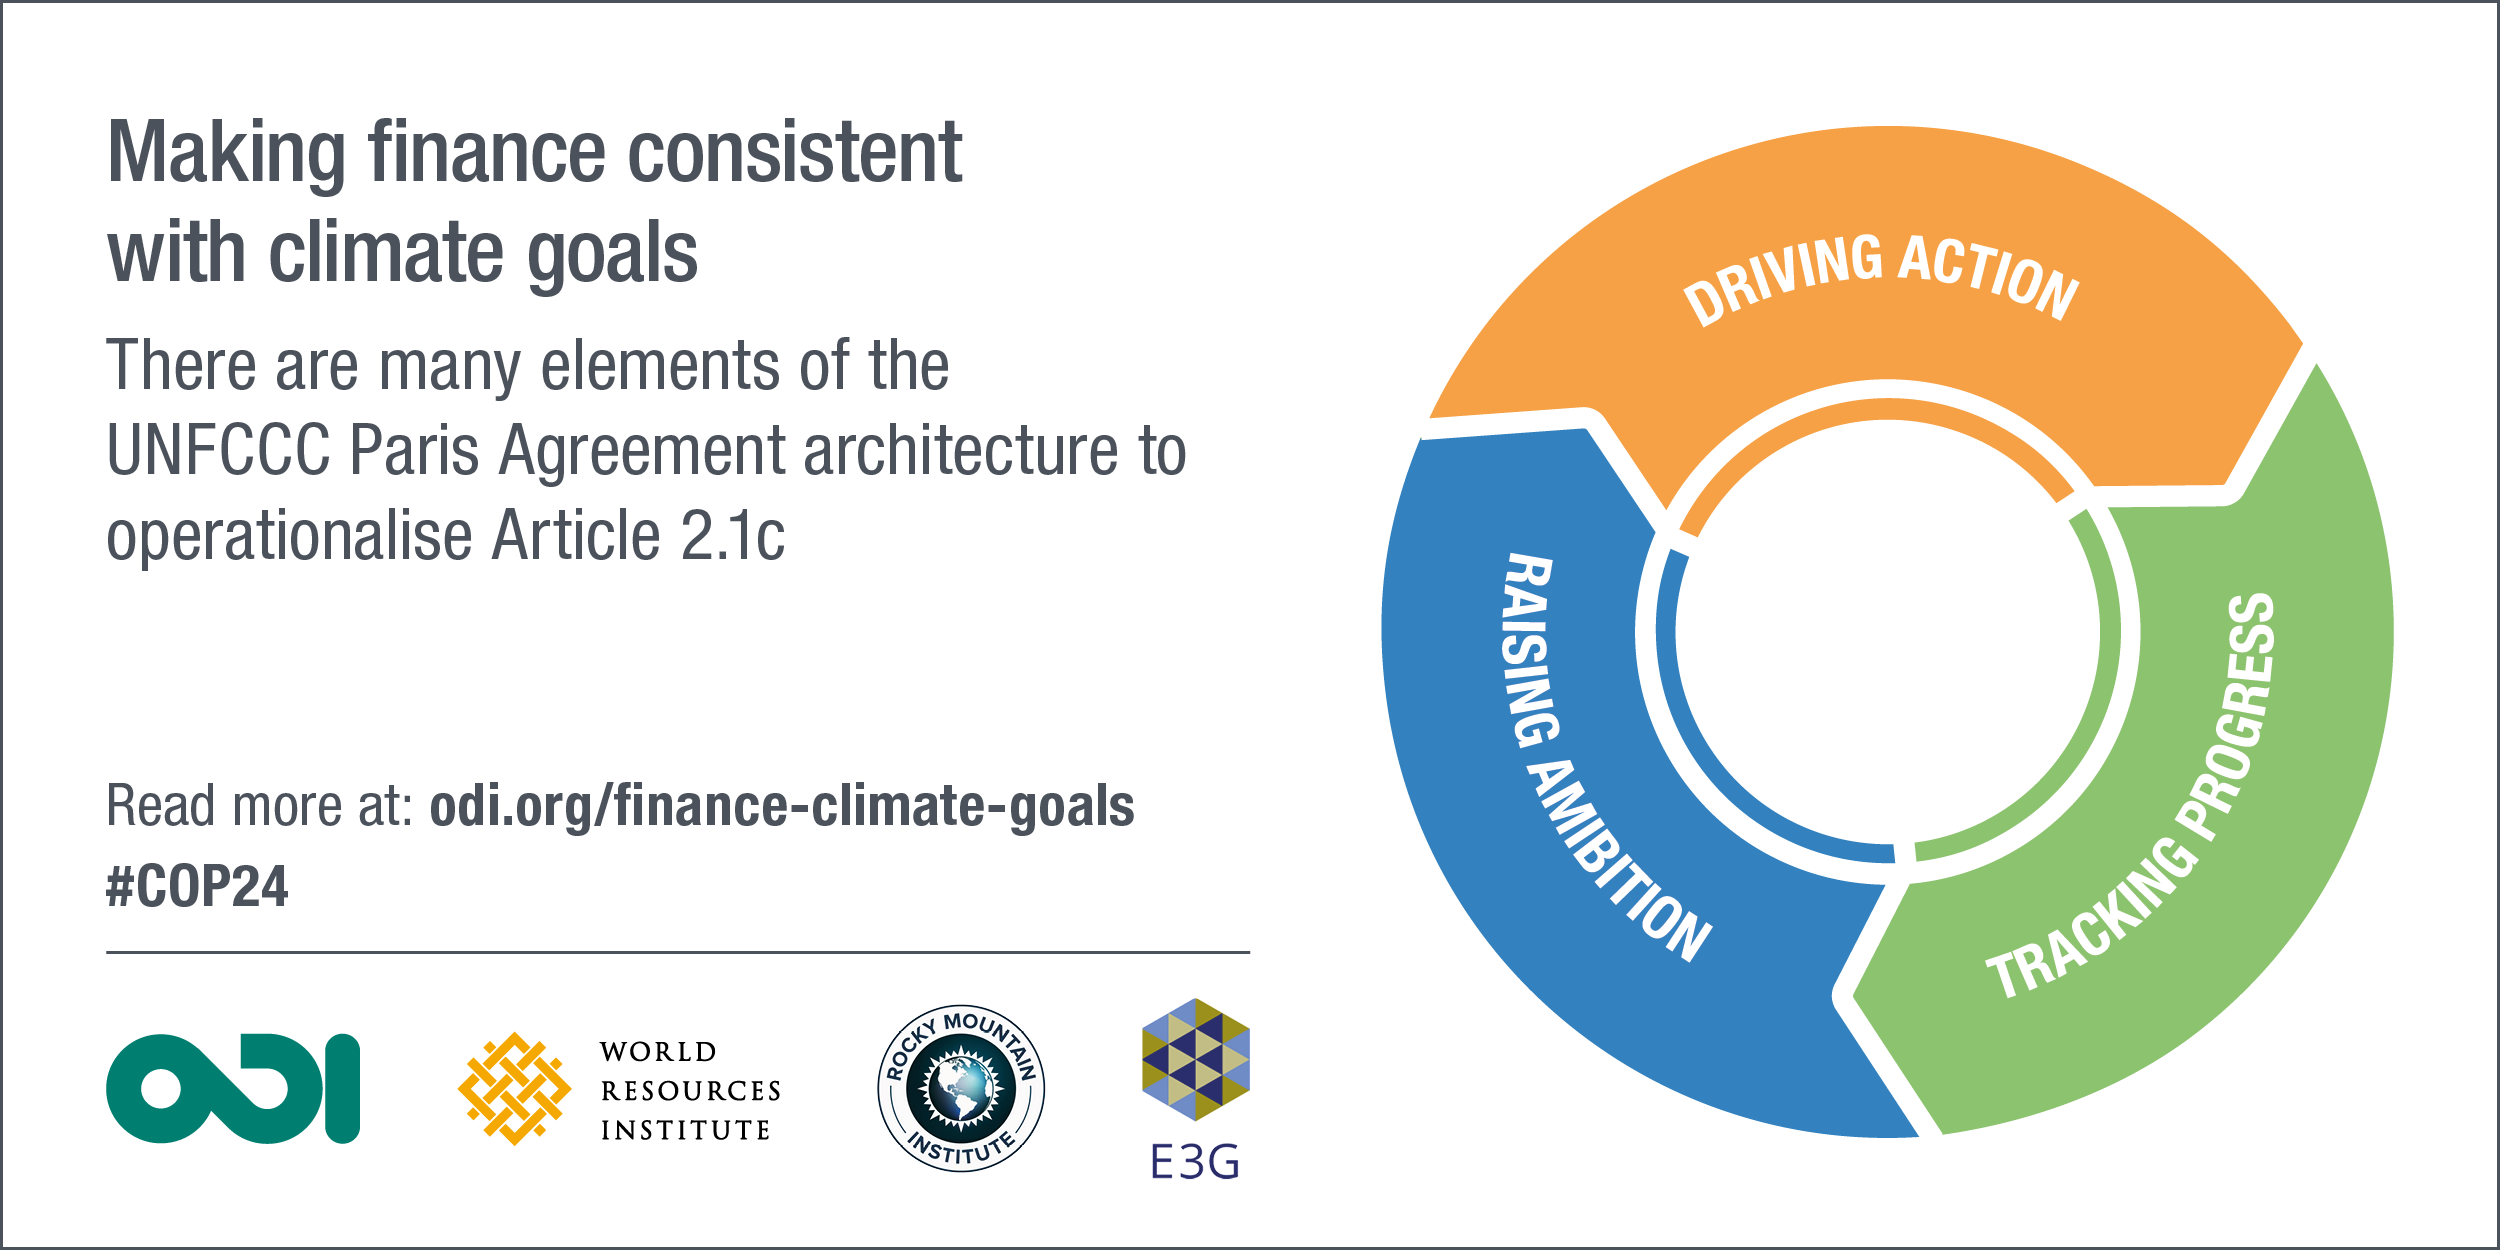 Making finance consistent with climate goals. © ODI 2018